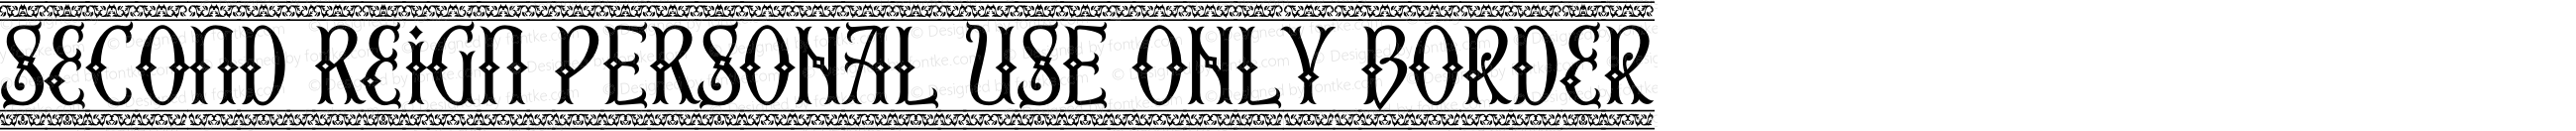 Second Reign PERSONAL USE ONLY Border